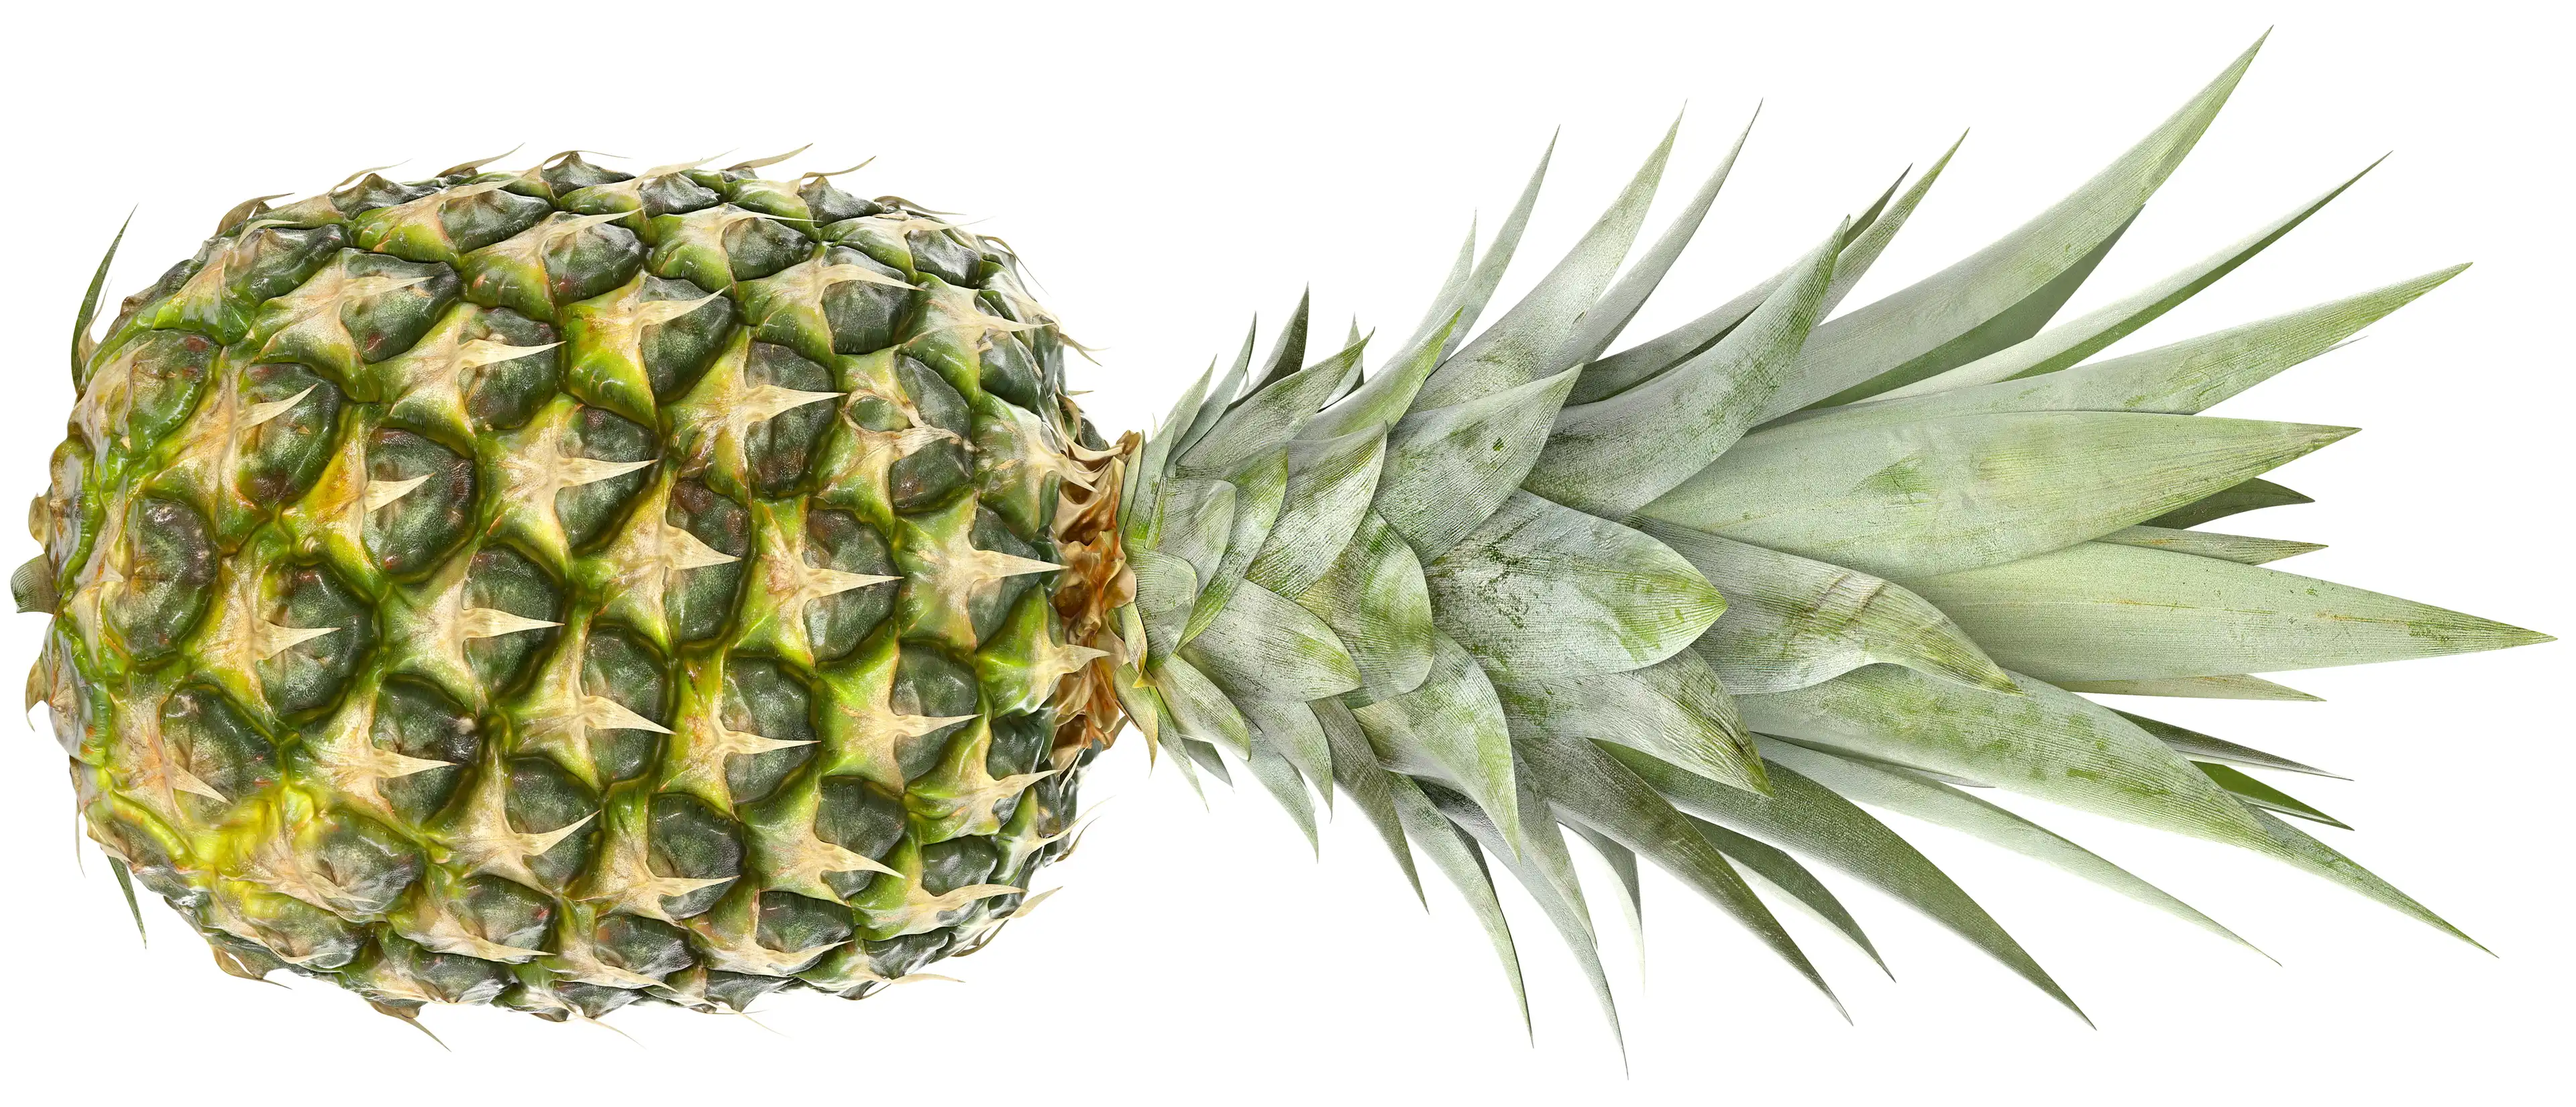 Pineapple with a crown, shown from the side, with the fruit on the left and the leaves of the crown on the right.